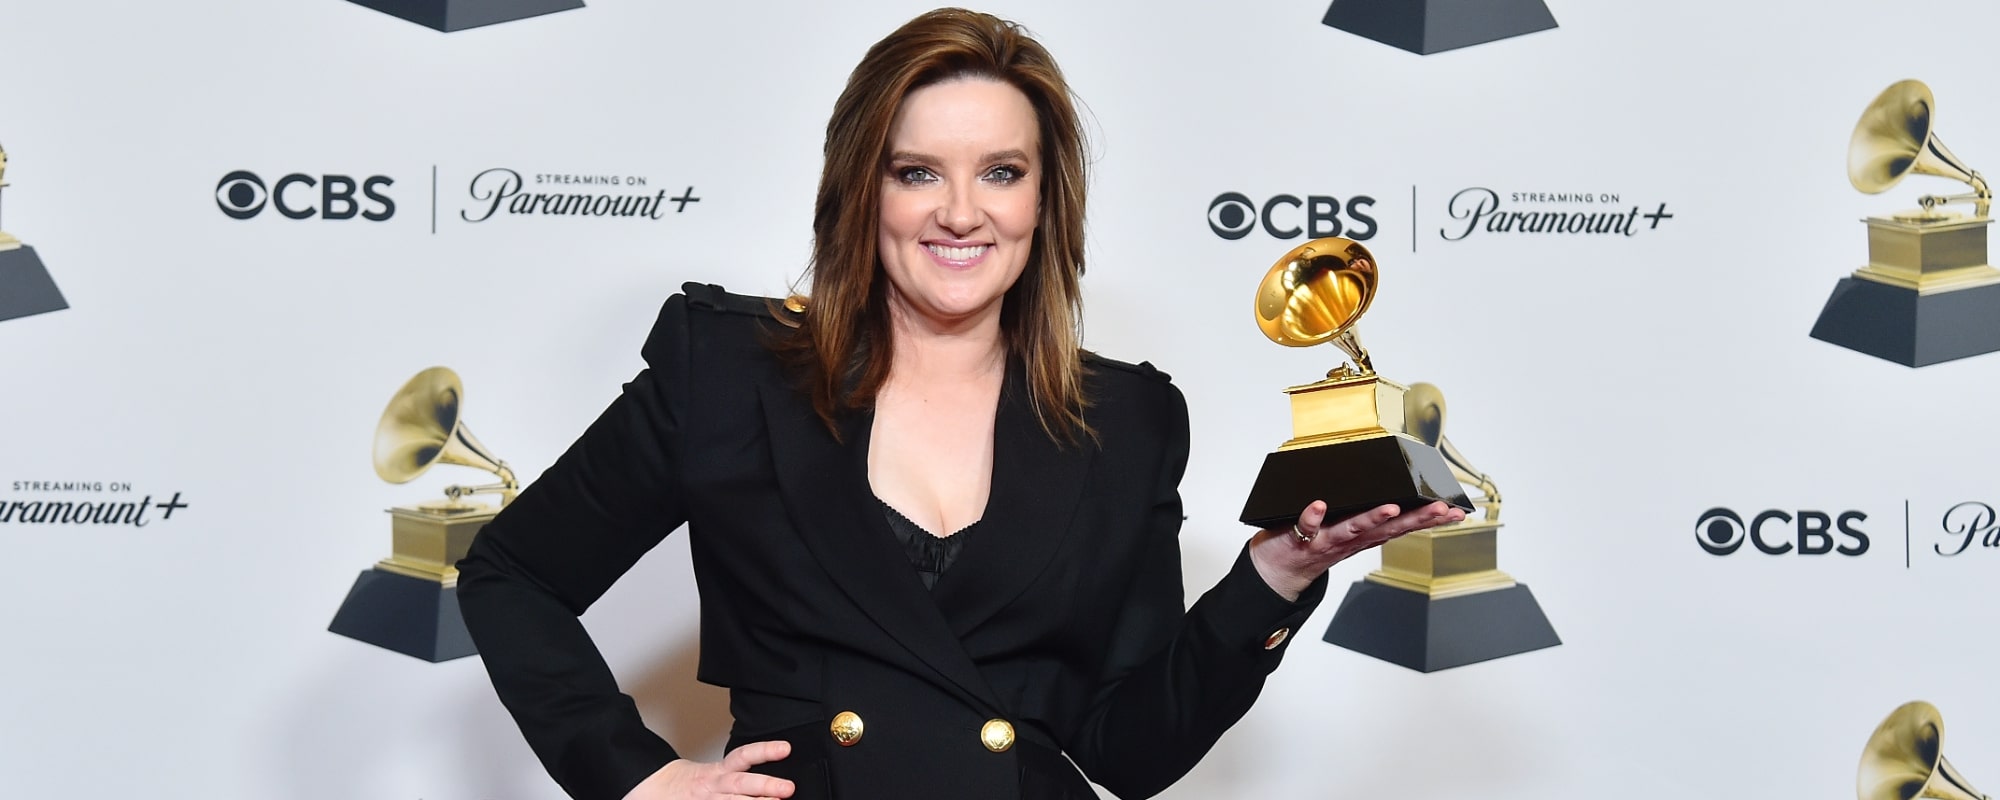 Fans Ready to "Riot" as Brandy Clark Finally Gets Over the GRAMMY Hump